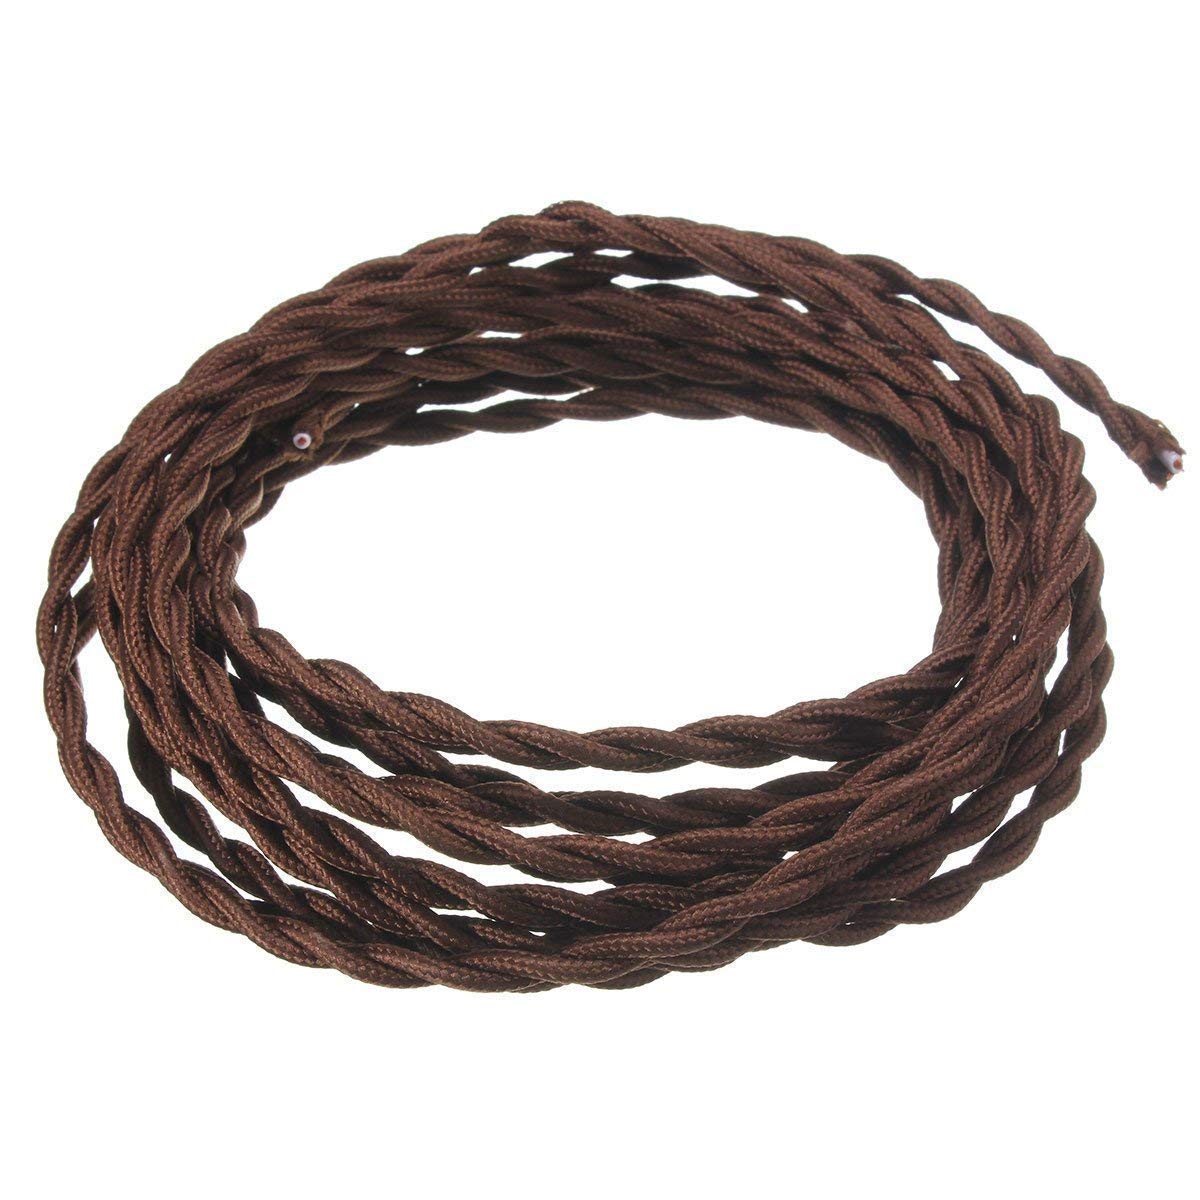 33' Retro Style Weave Rope Open Wires Antique Industrial Electrical Cord- Brown